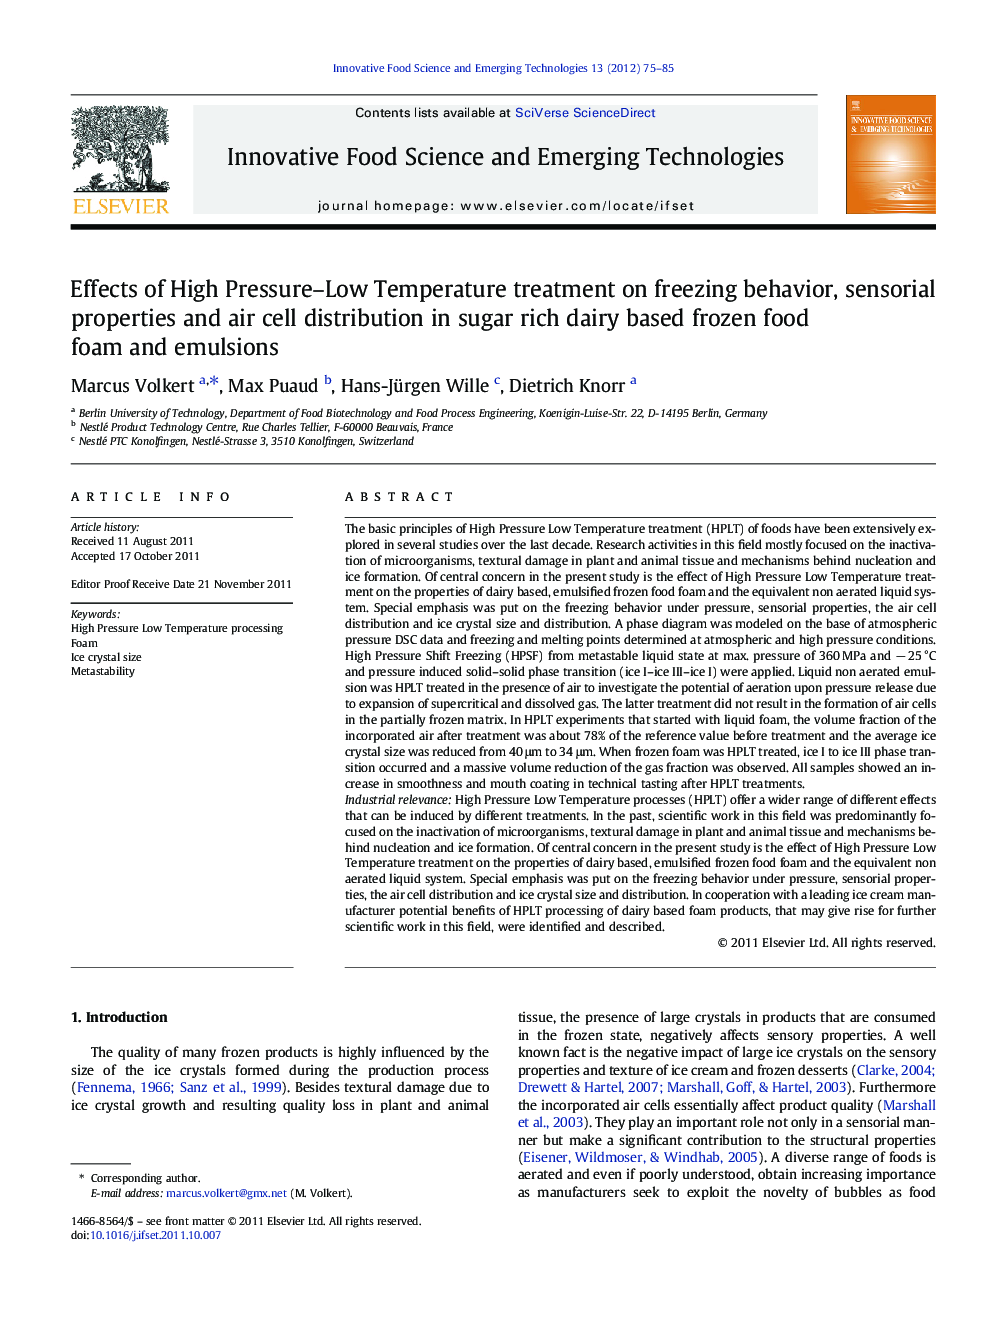 Effects of High Pressure–Low Temperature treatment on freezing behavior, sensorial properties and air cell distribution in sugar rich dairy based frozen food foam and emulsions